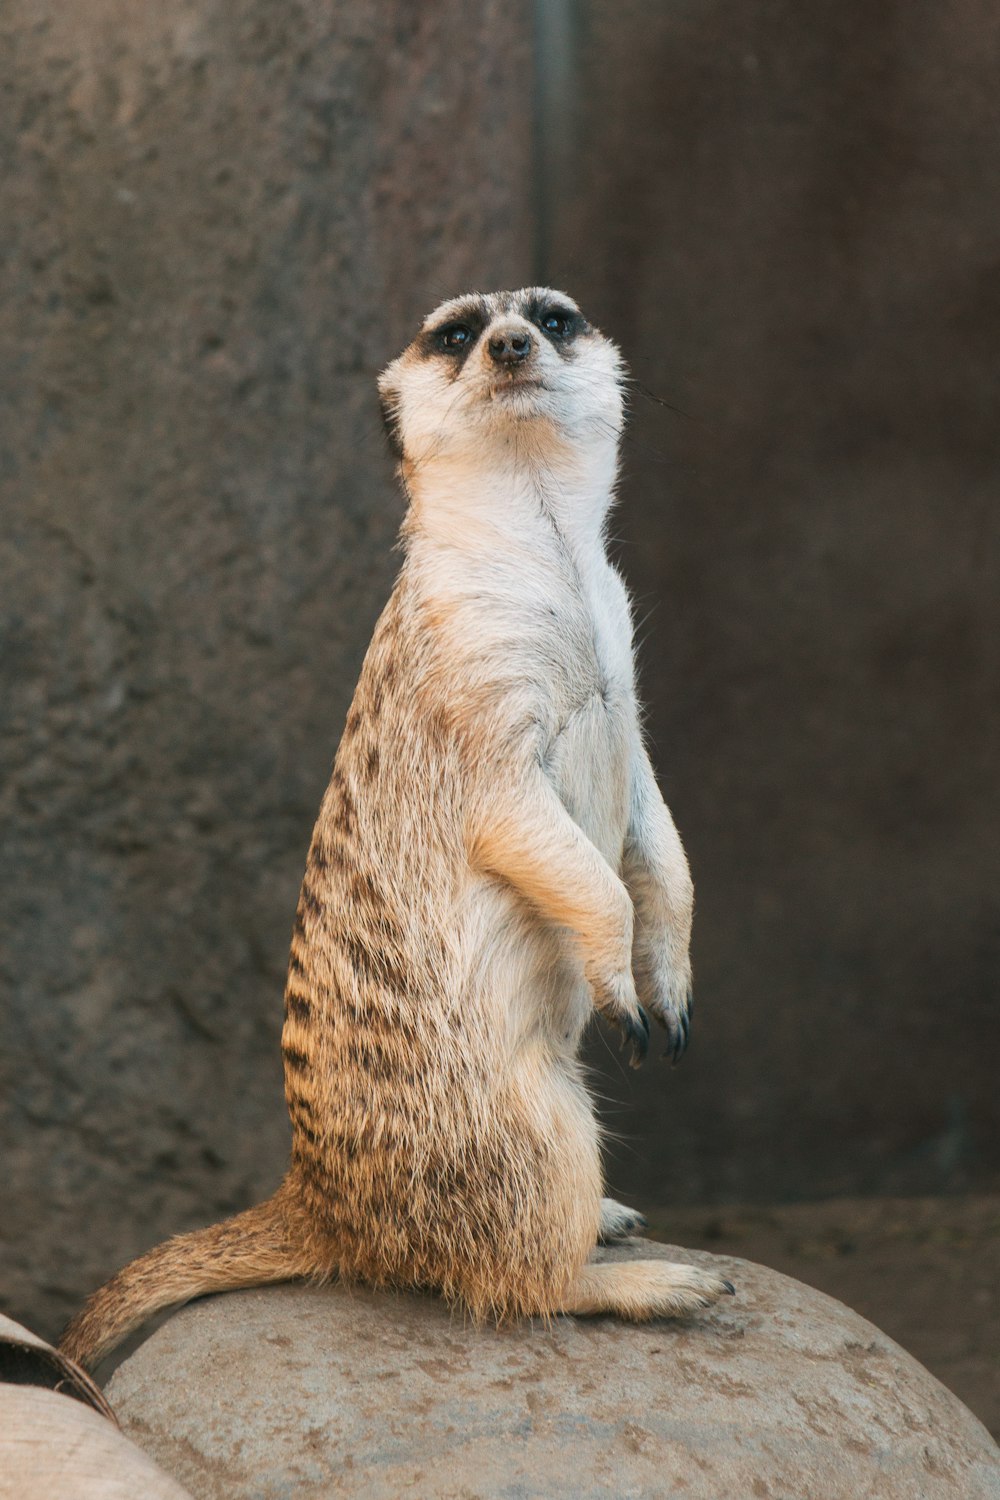 a small animal standing on its hind legs